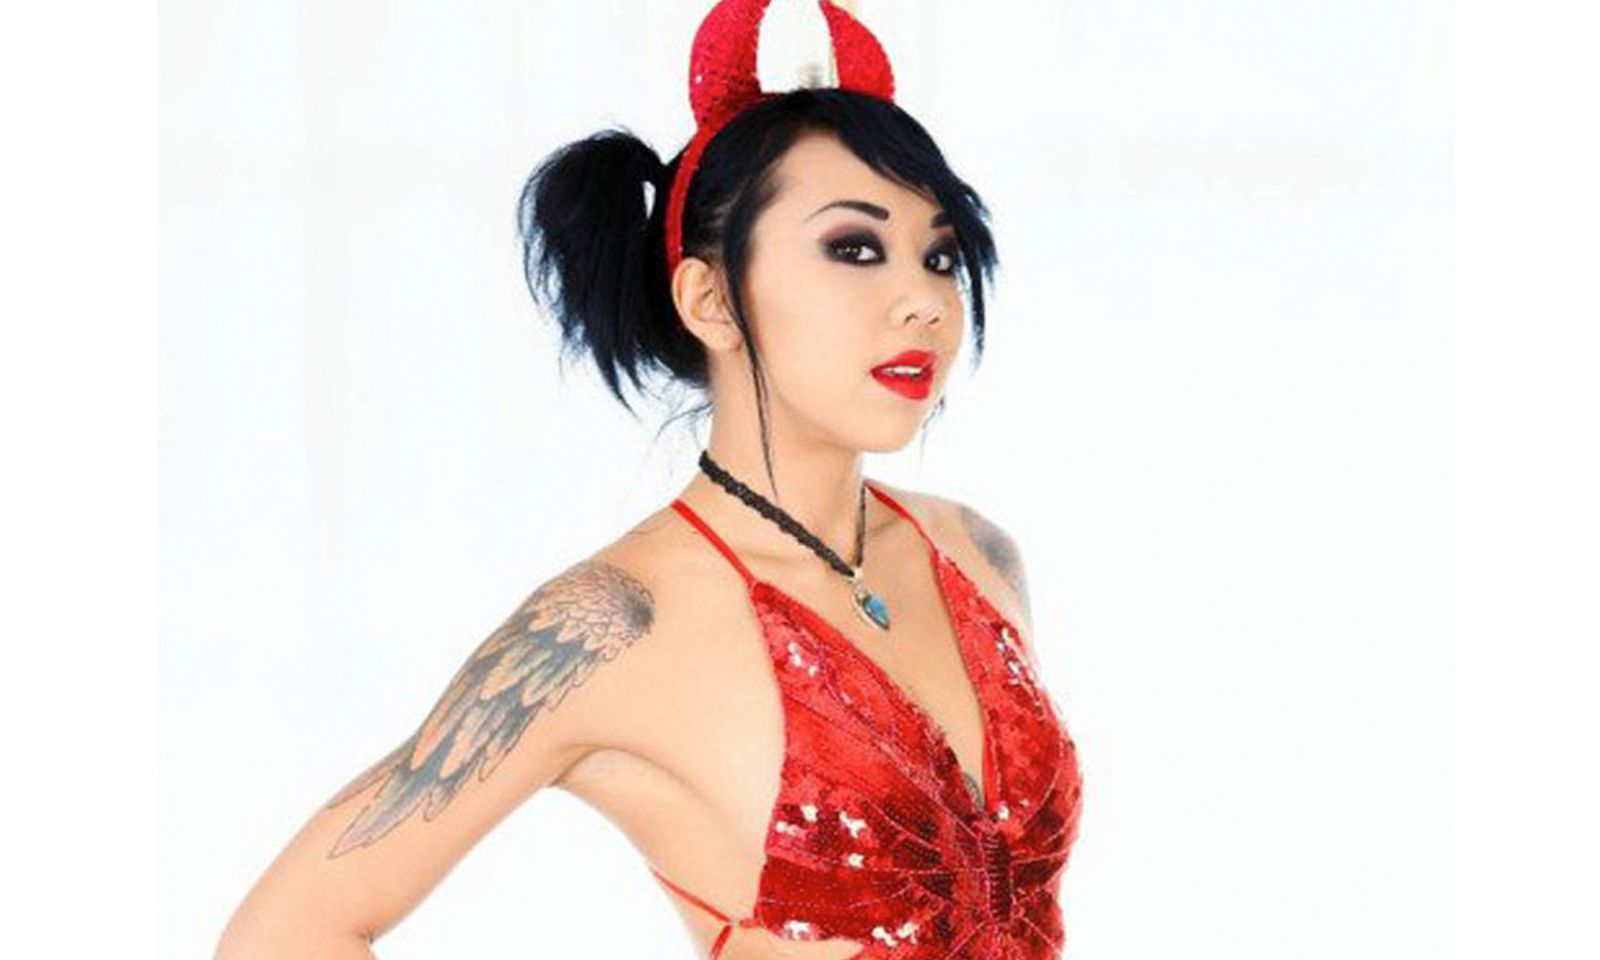 Kimberly Chi In New Releases, Appearing at Exxxotica Chicago